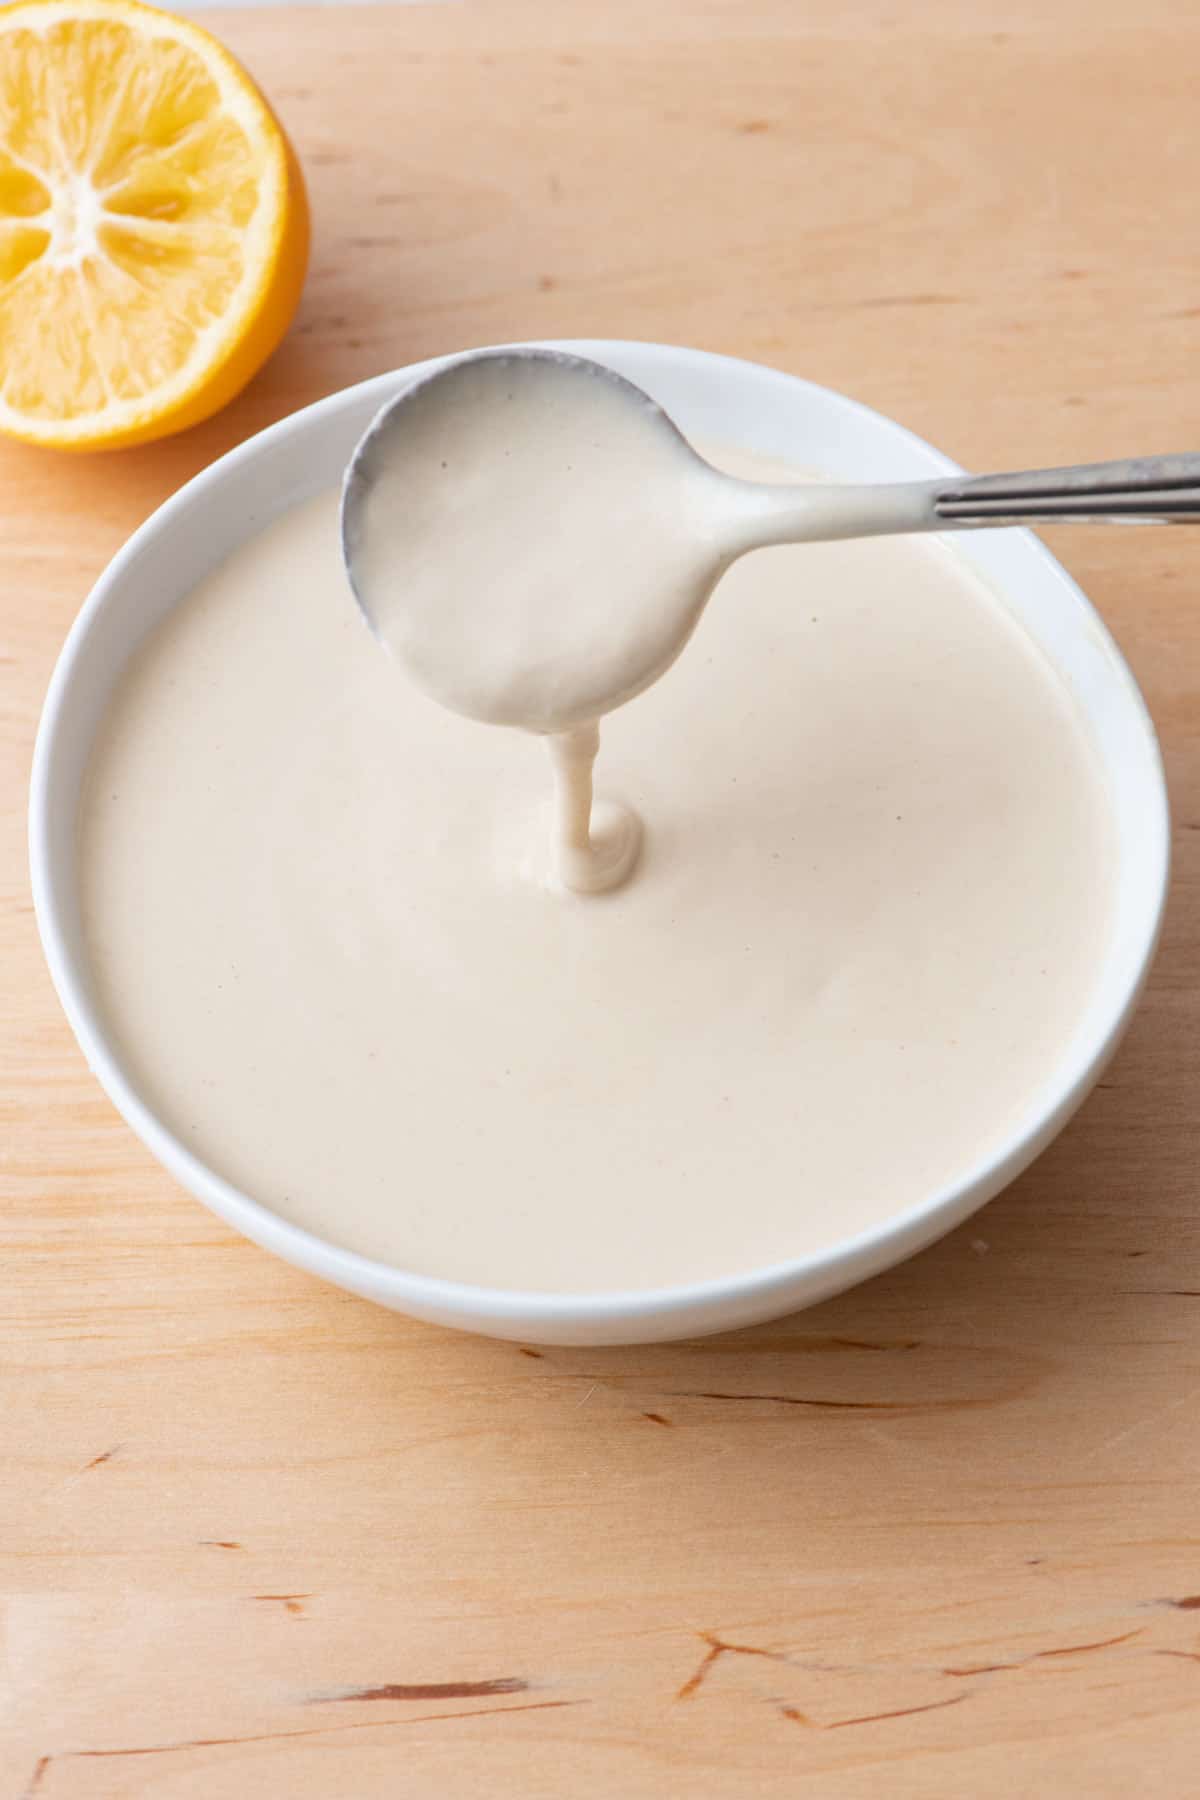 Spoon lifting up sauce from a bowl to show smooth, creamy, and runny consistency.